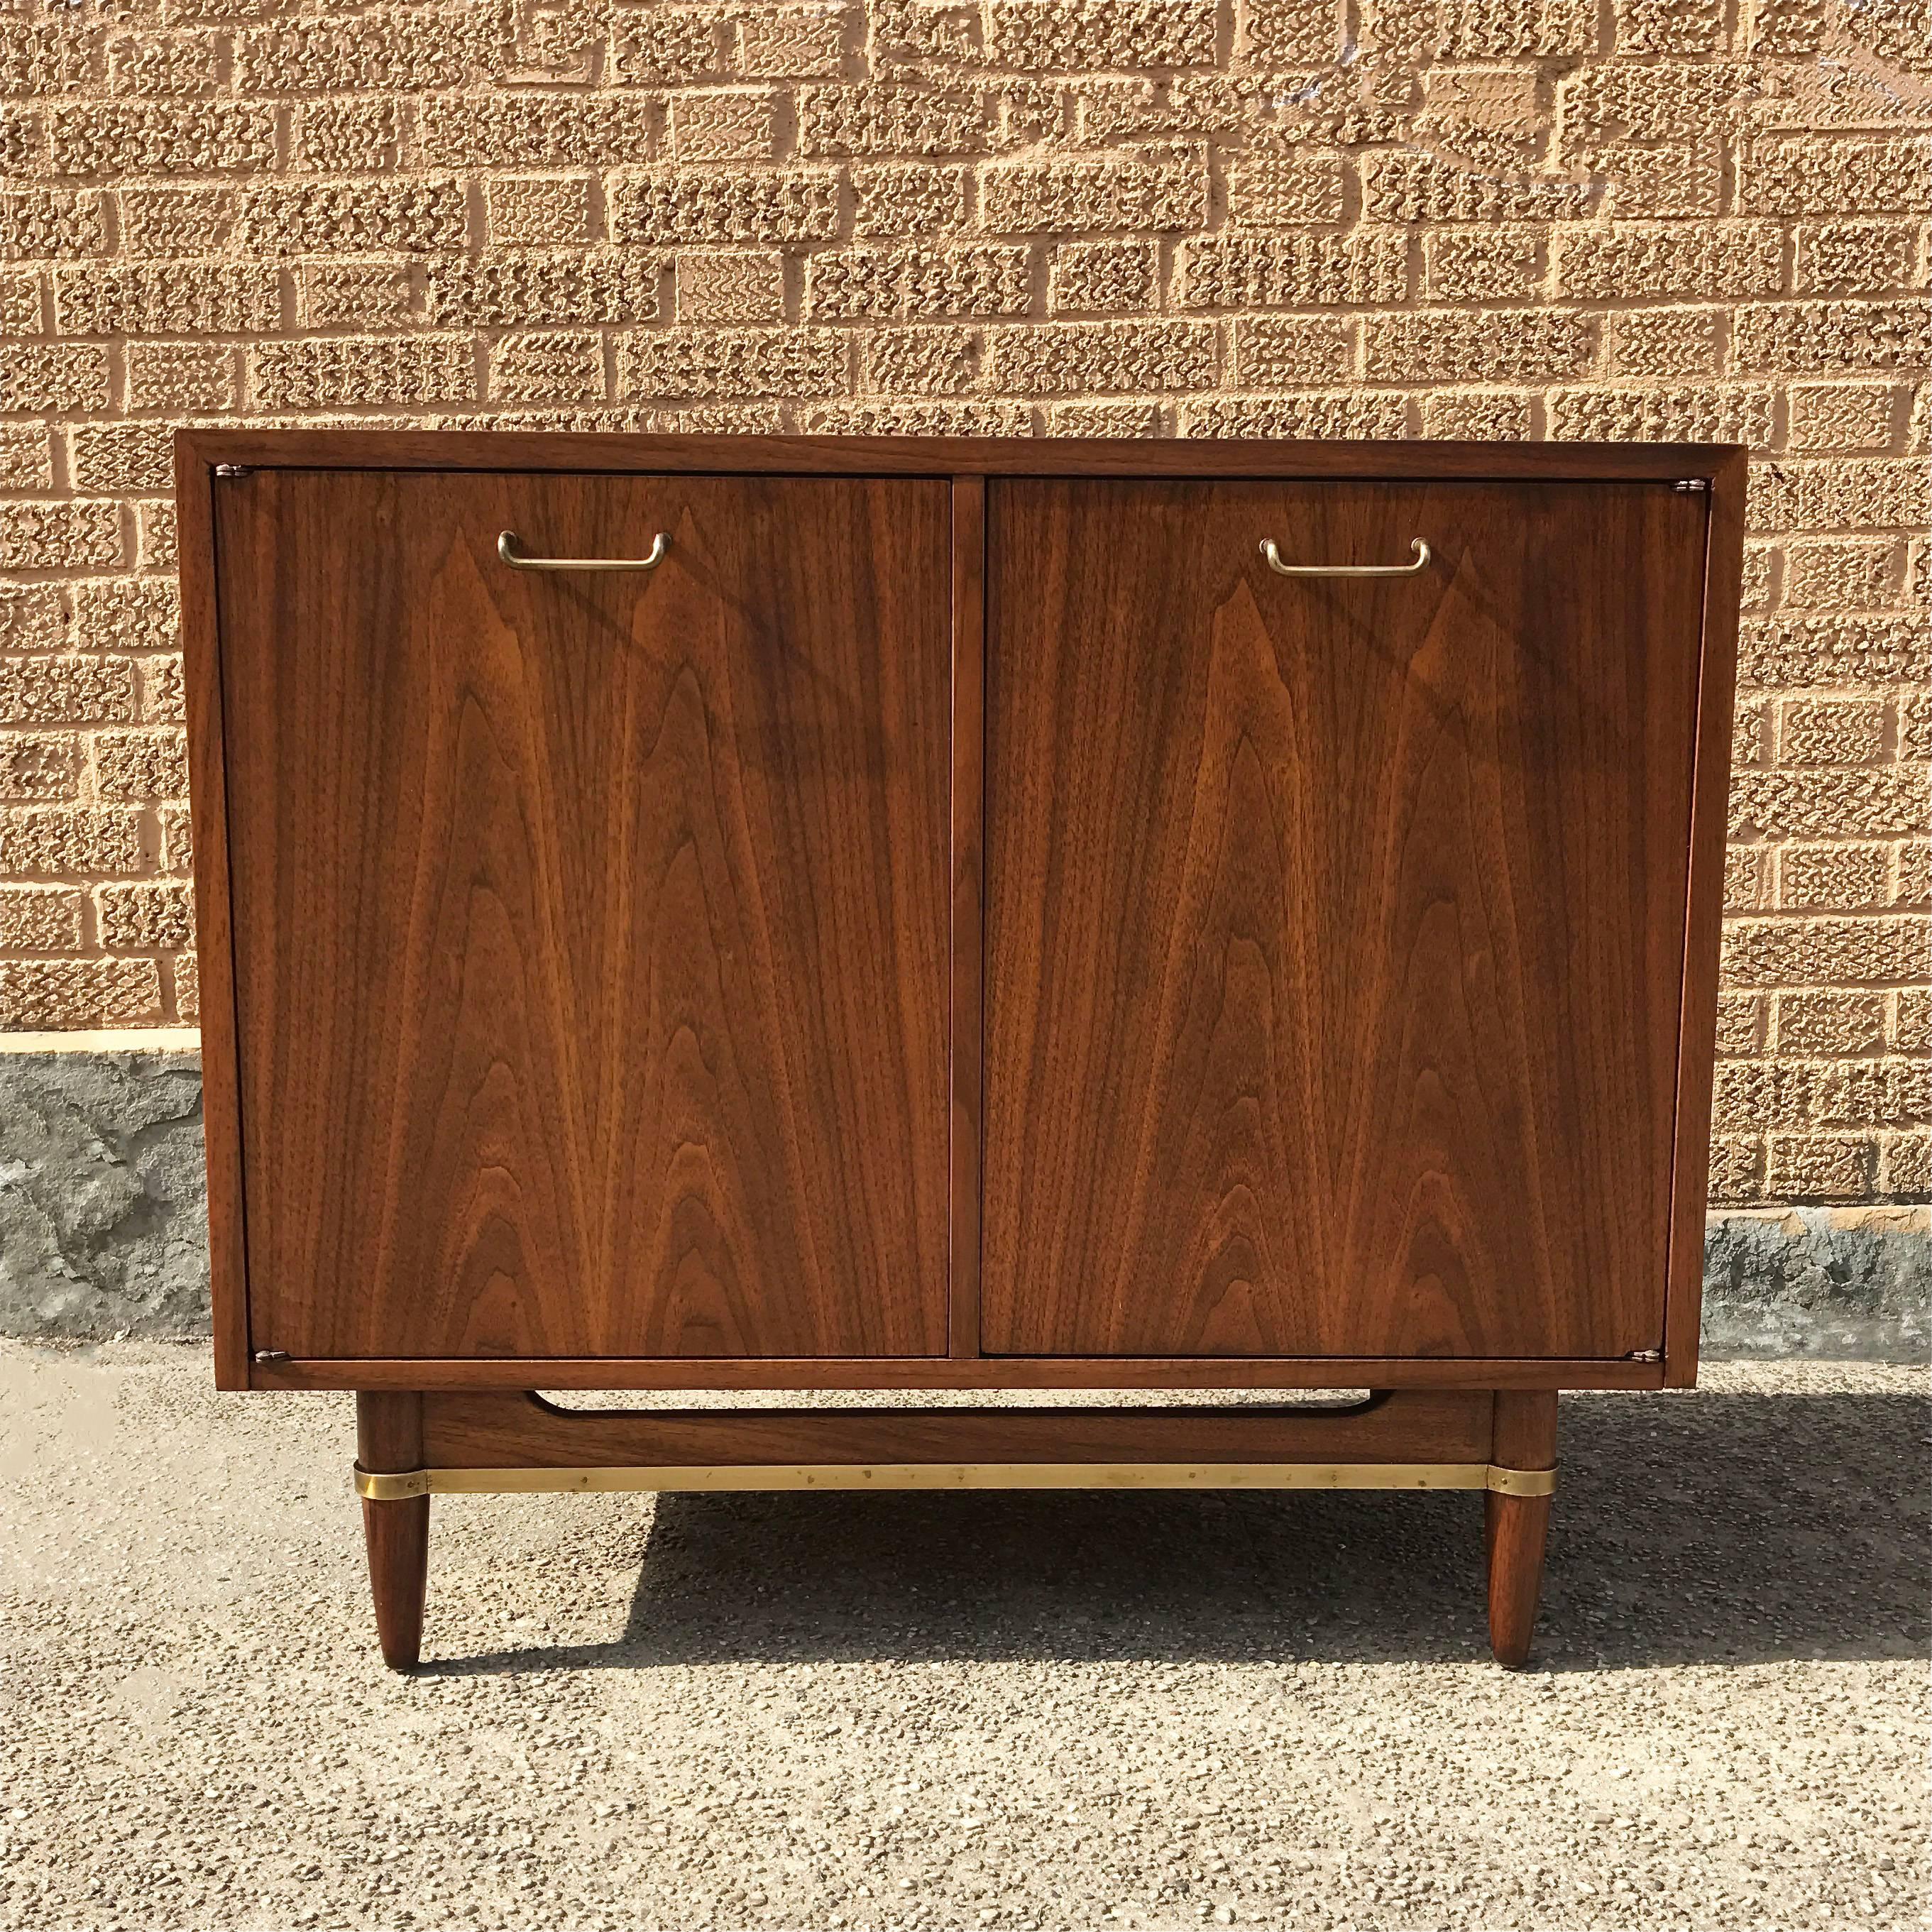 Mid-Century Modern, walnut dresser with brass accents by Merton Gershon for American’s of Martinsville also works well as a liquor or record cabinet or small sideboard.

  